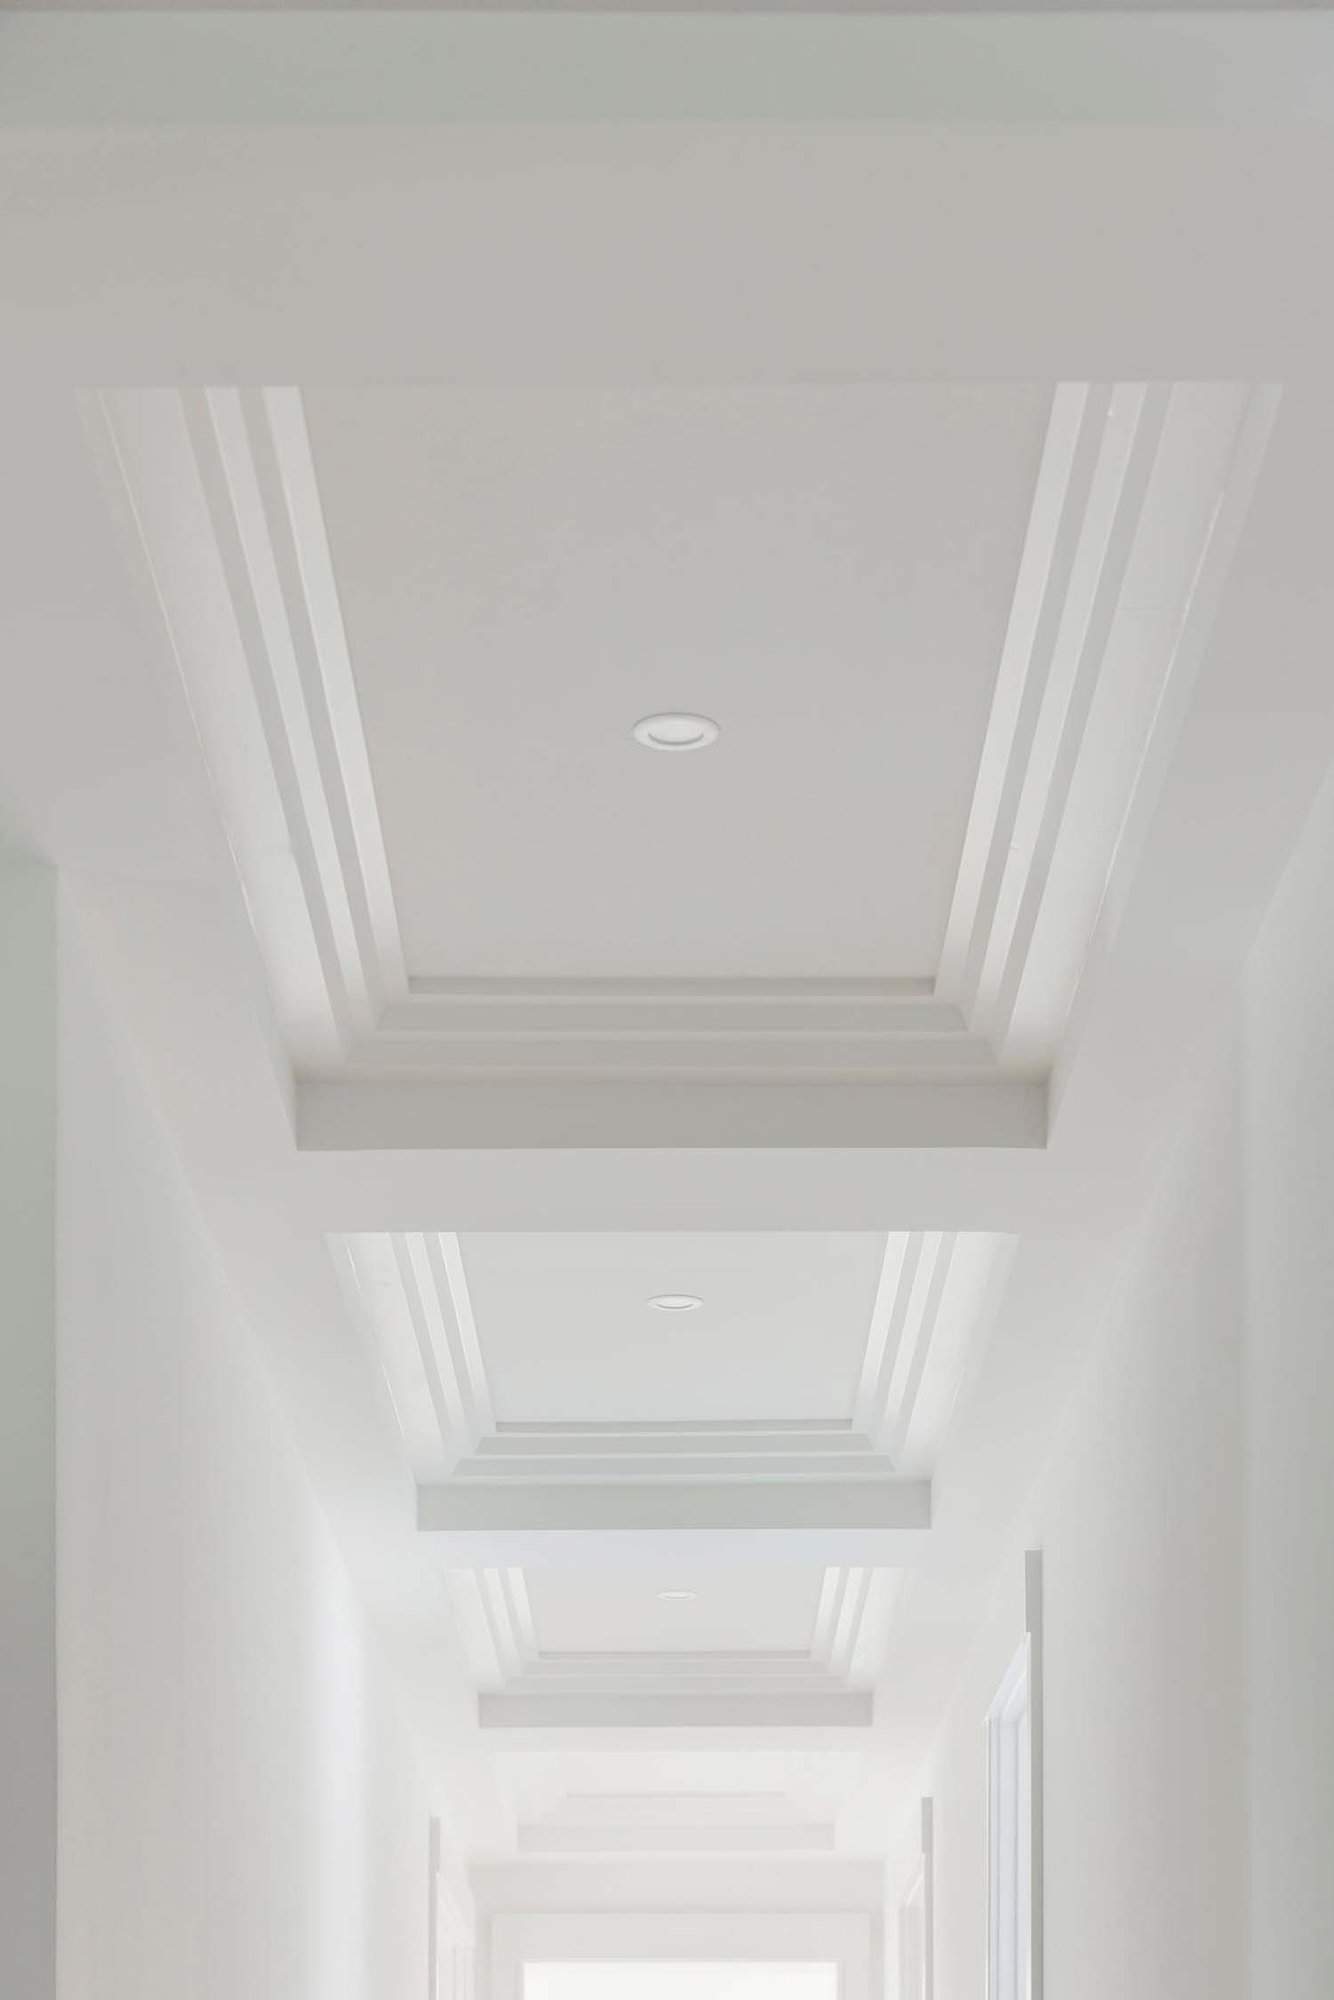 transitional hallway ceiling detail